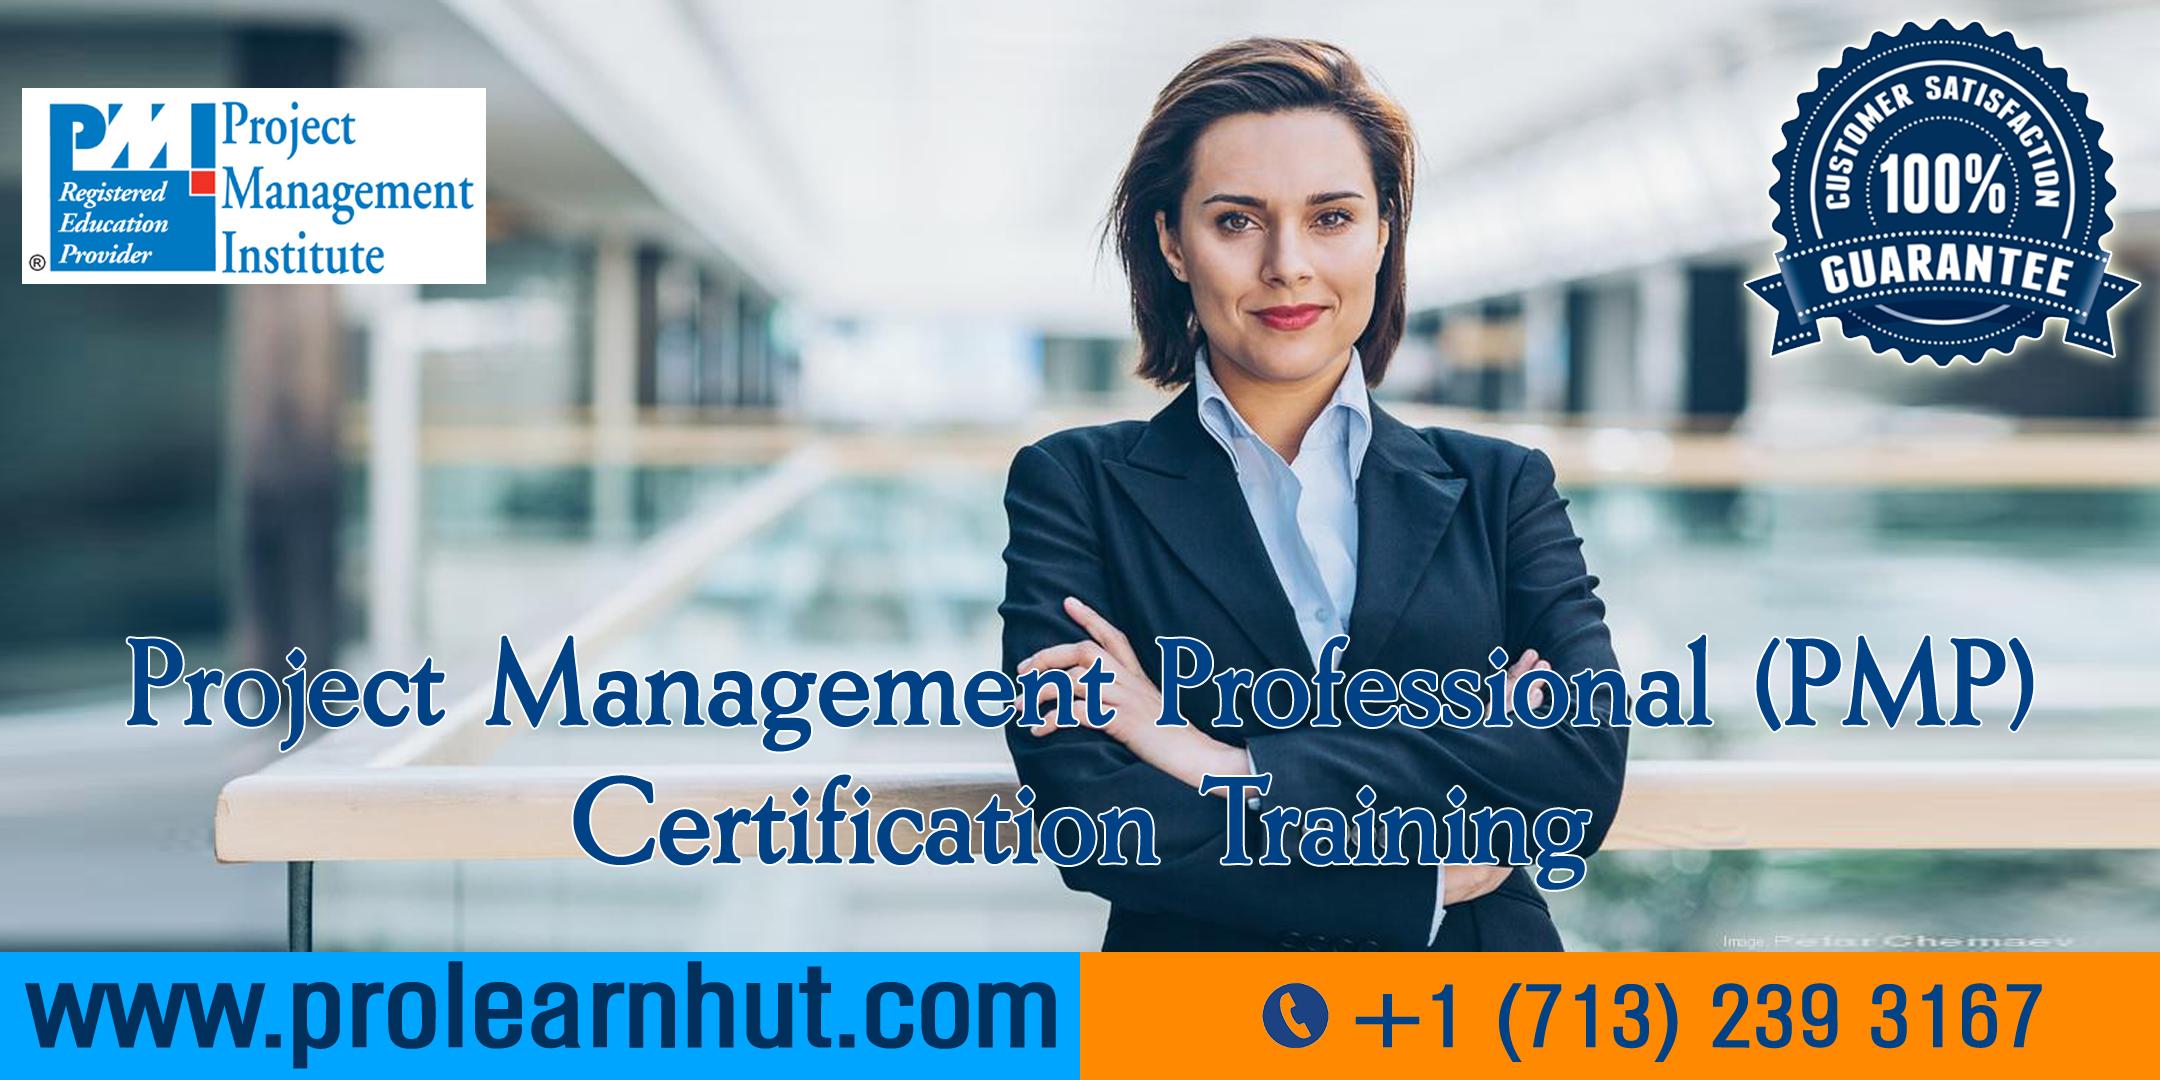 PMP Certification | Project Management Certification| PMP Training in San Antonio, TX | ProLearnHut